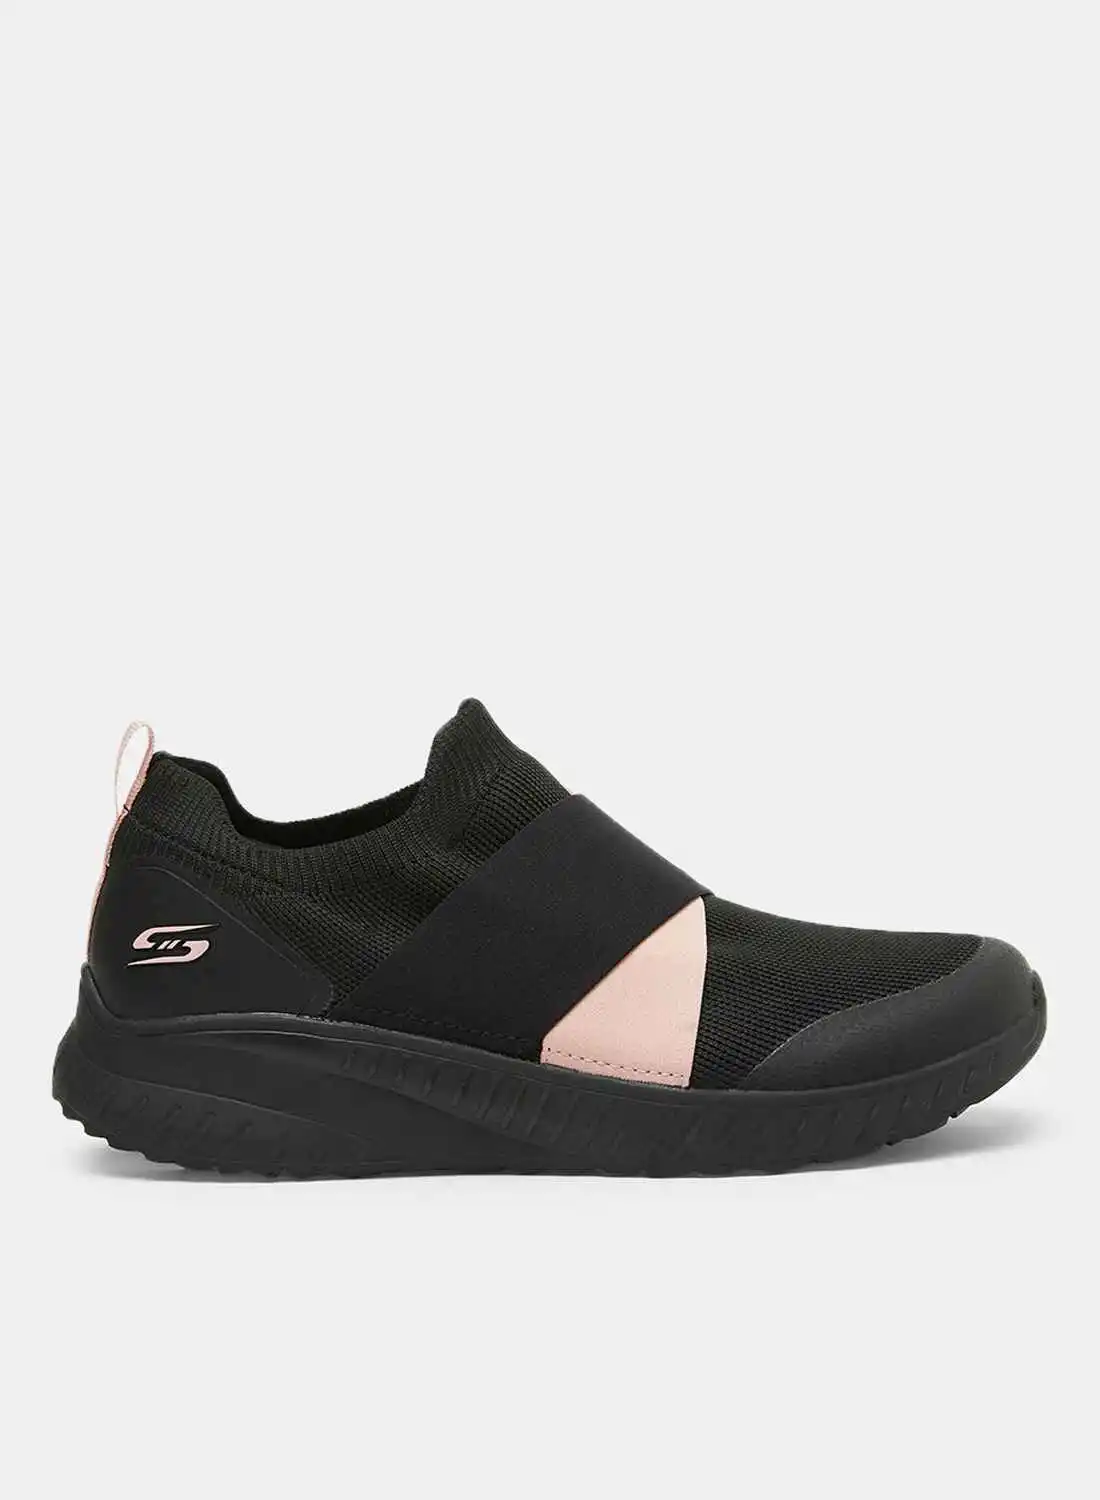 SKECHERS Bobs Squad Chaos Slip-Ons